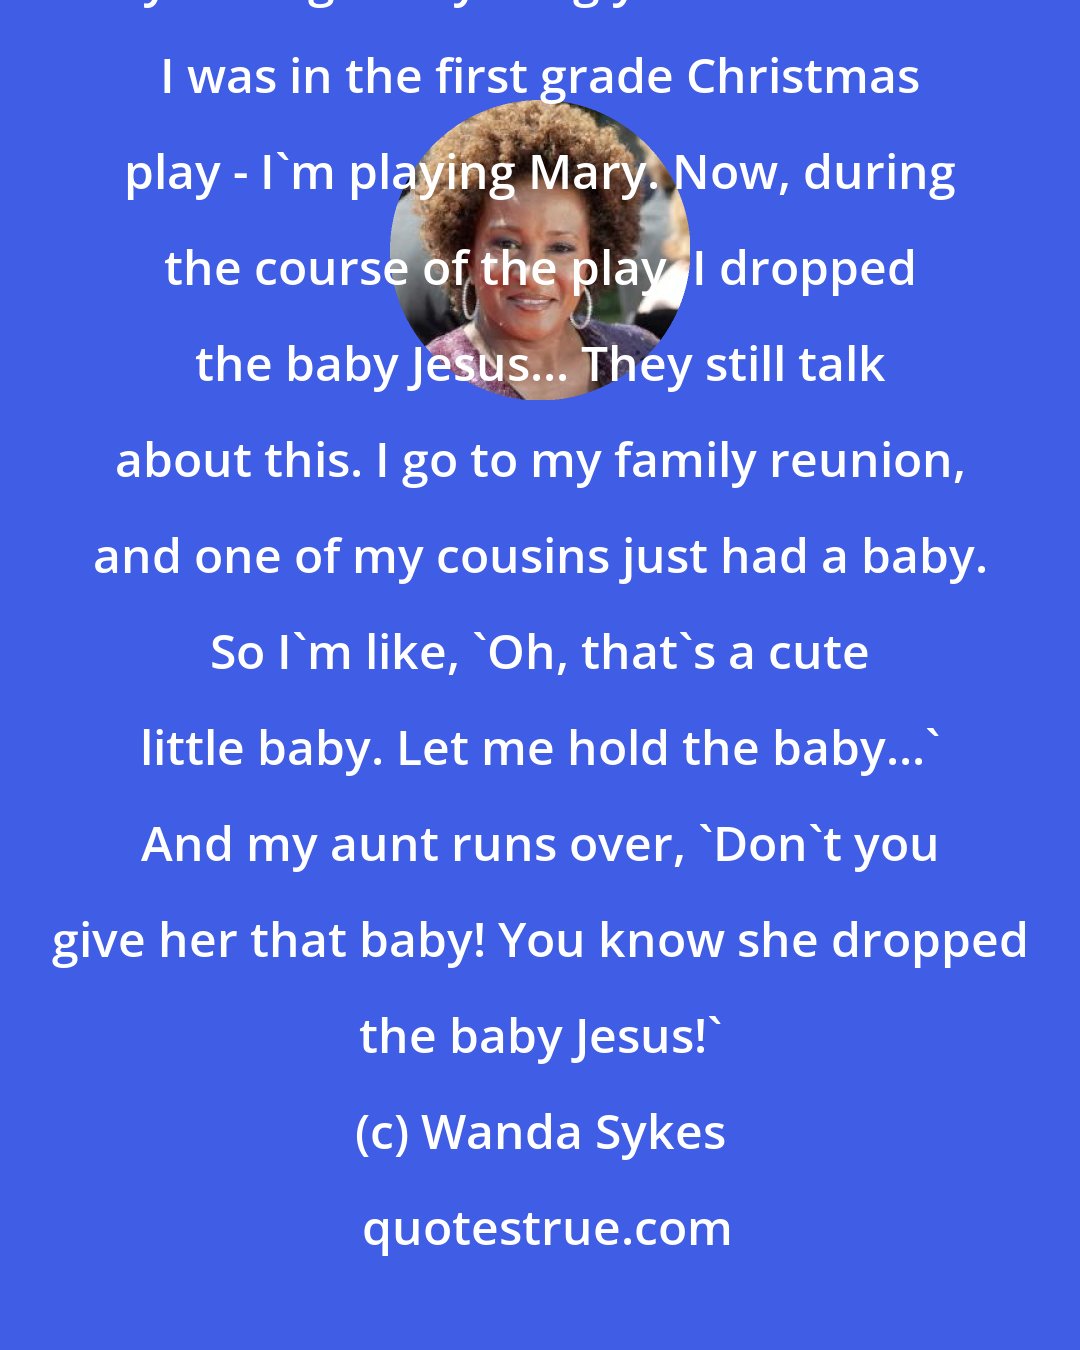 Wanda Sykes: I love my family but my family - they're the type of people that never let you forget anything you ever did... I was in the first grade Christmas play - I'm playing Mary. Now, during the course of the play, I dropped the baby Jesus... They still talk about this. I go to my family reunion, and one of my cousins just had a baby. So I'm like, 'Oh, that's a cute little baby. Let me hold the baby...' And my aunt runs over, 'Don't you give her that baby! You know she dropped the baby Jesus!'